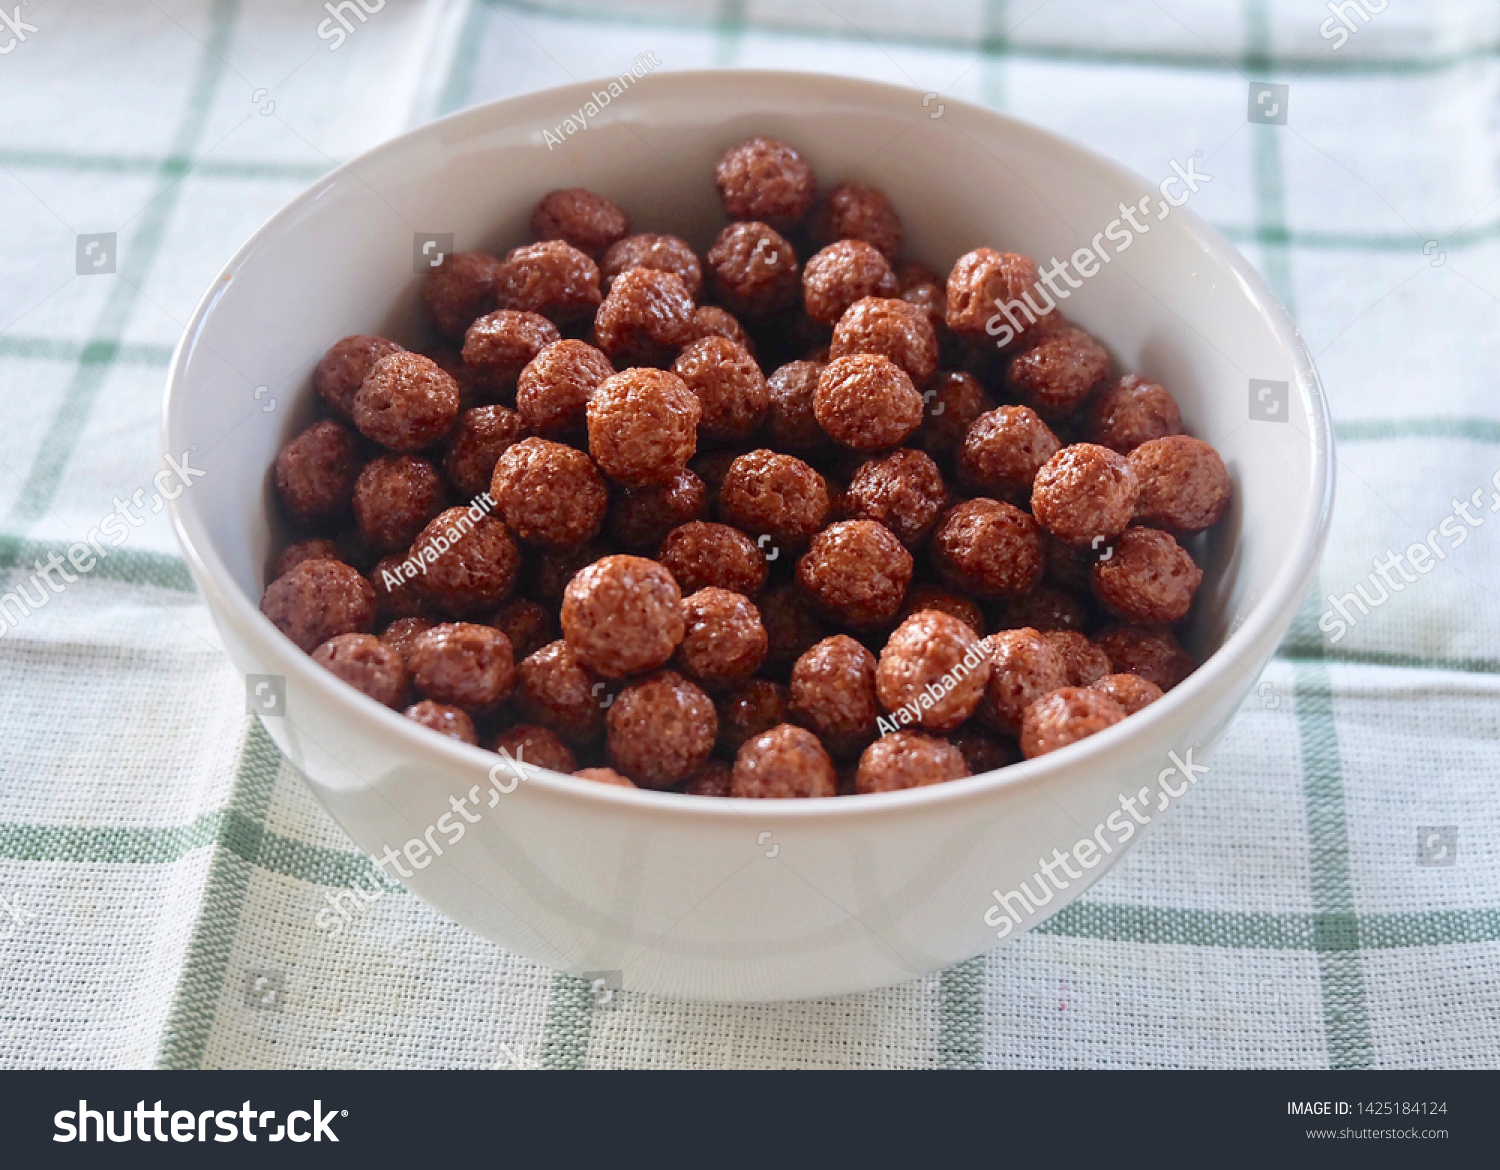 Chocolate Cornflakes in A Bowl, A Breakfast Cereal Made by Toasting Flakes of Corn or Maize. #1425184124